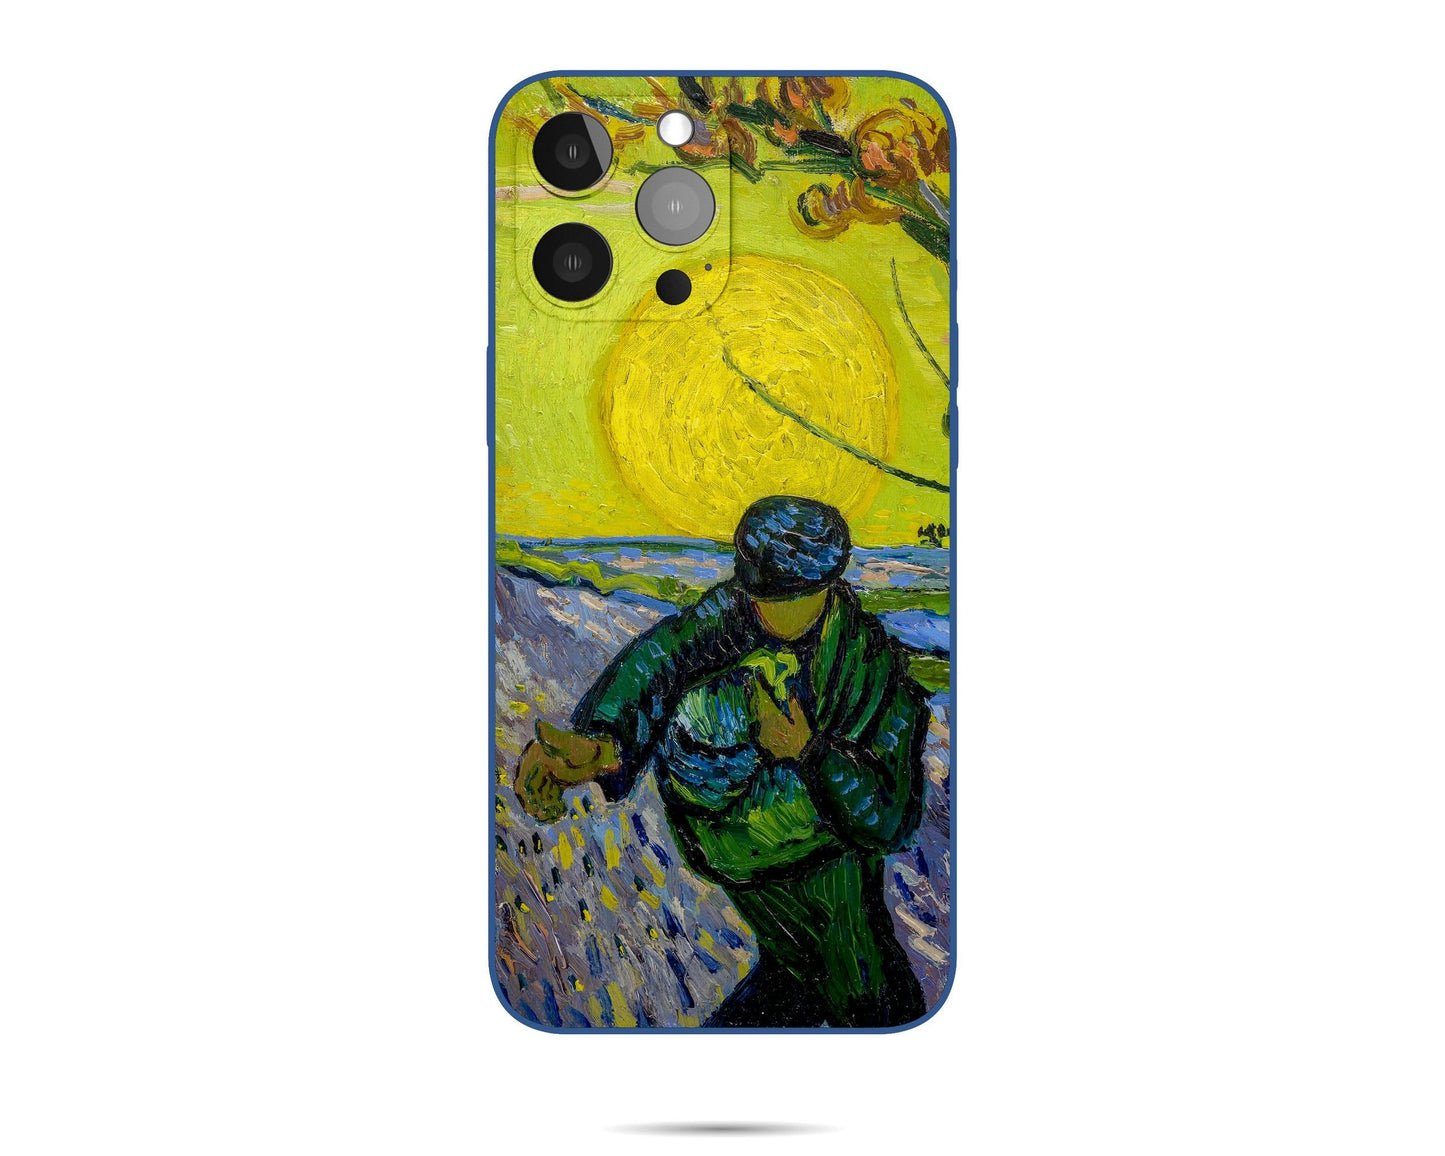 Iphone 14 Case Of Vincent Van Gogh Famous Painting The Sower, Iphone 8 Plus, Iphone Se 2020, Designer Iphone Case, Iphone Case Protectivee